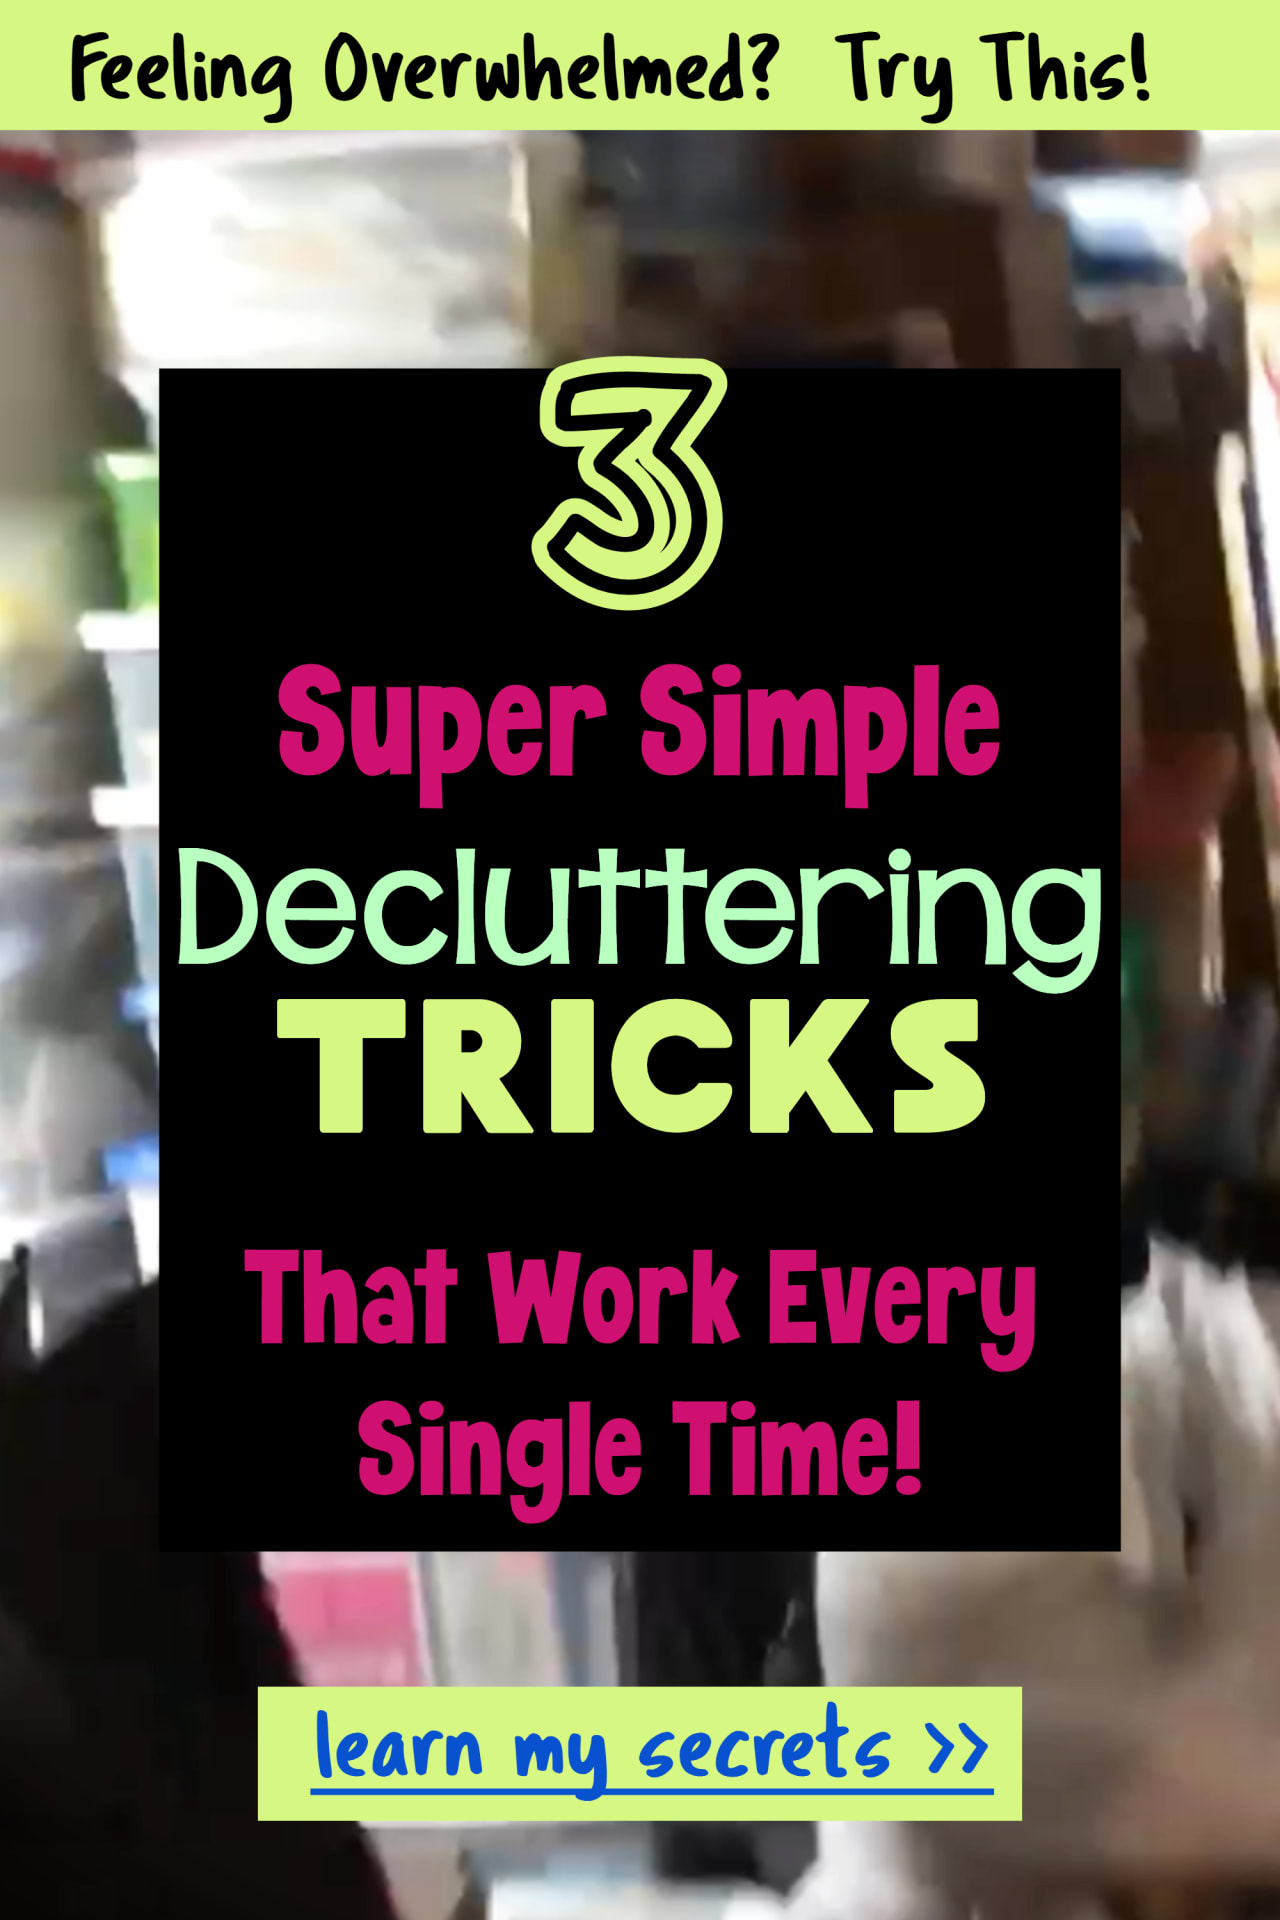 Decluttering Ideas That Work When you're feeling overwhelmed - where to START decluttering is so hard if you're overwhelmed try my 3 decluttering tips they really work!